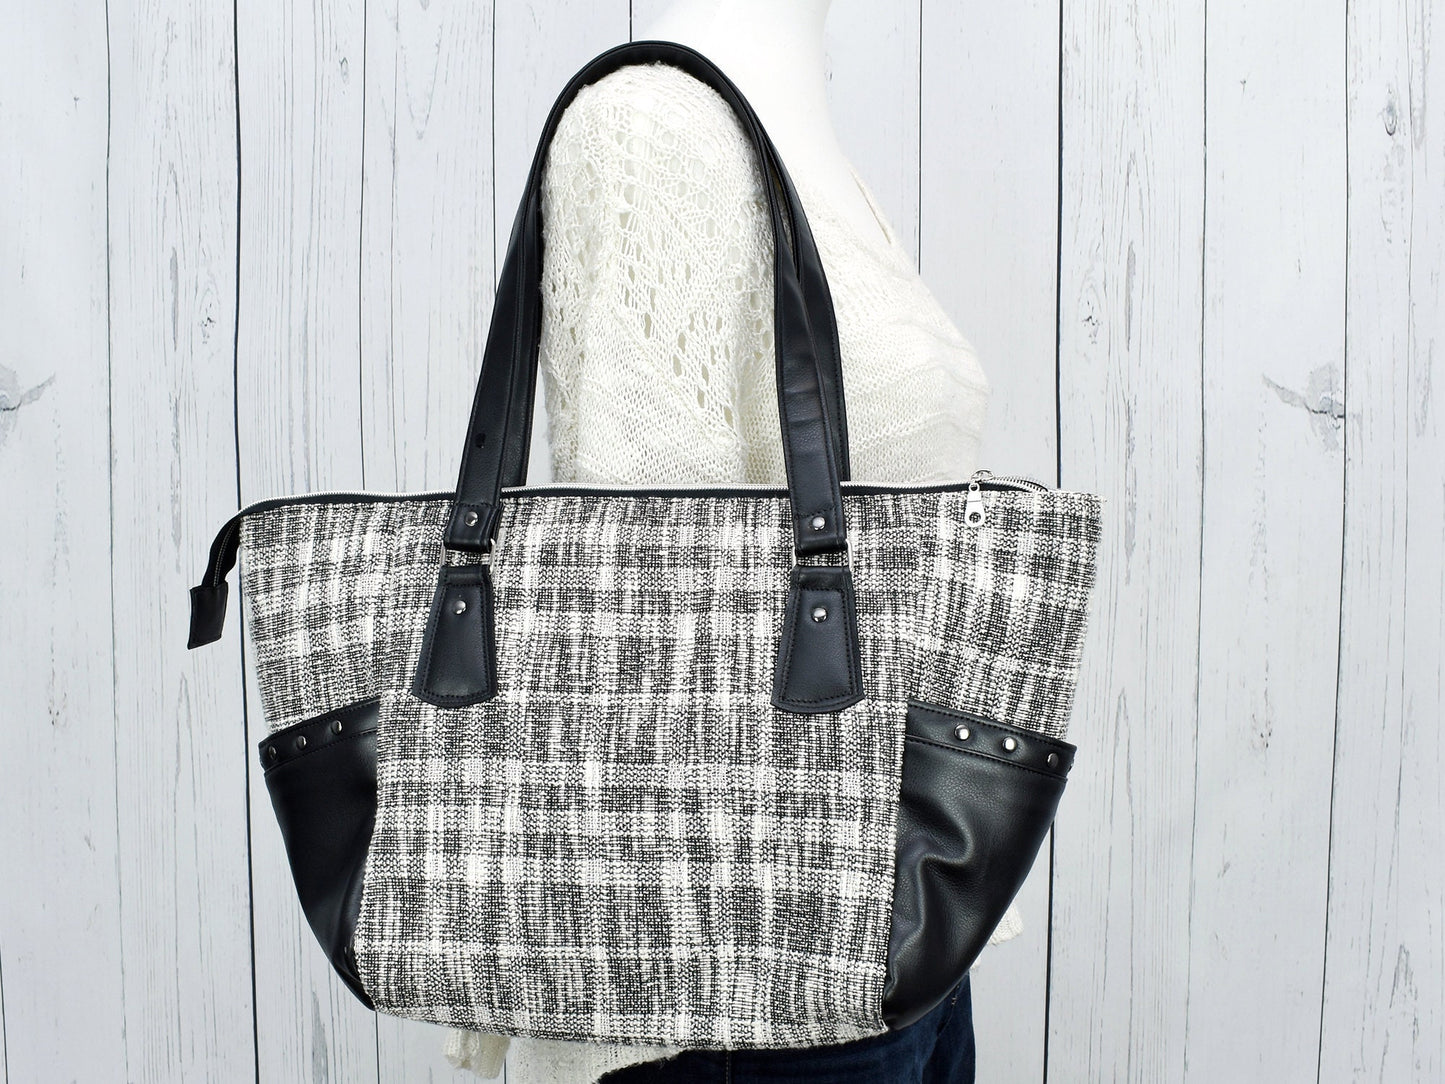 Women's Handbag - Modern Faux Leather Tote - Tweed Purse - Black and White Ladies Bag - Classic Styled Purse - Executive Carry All